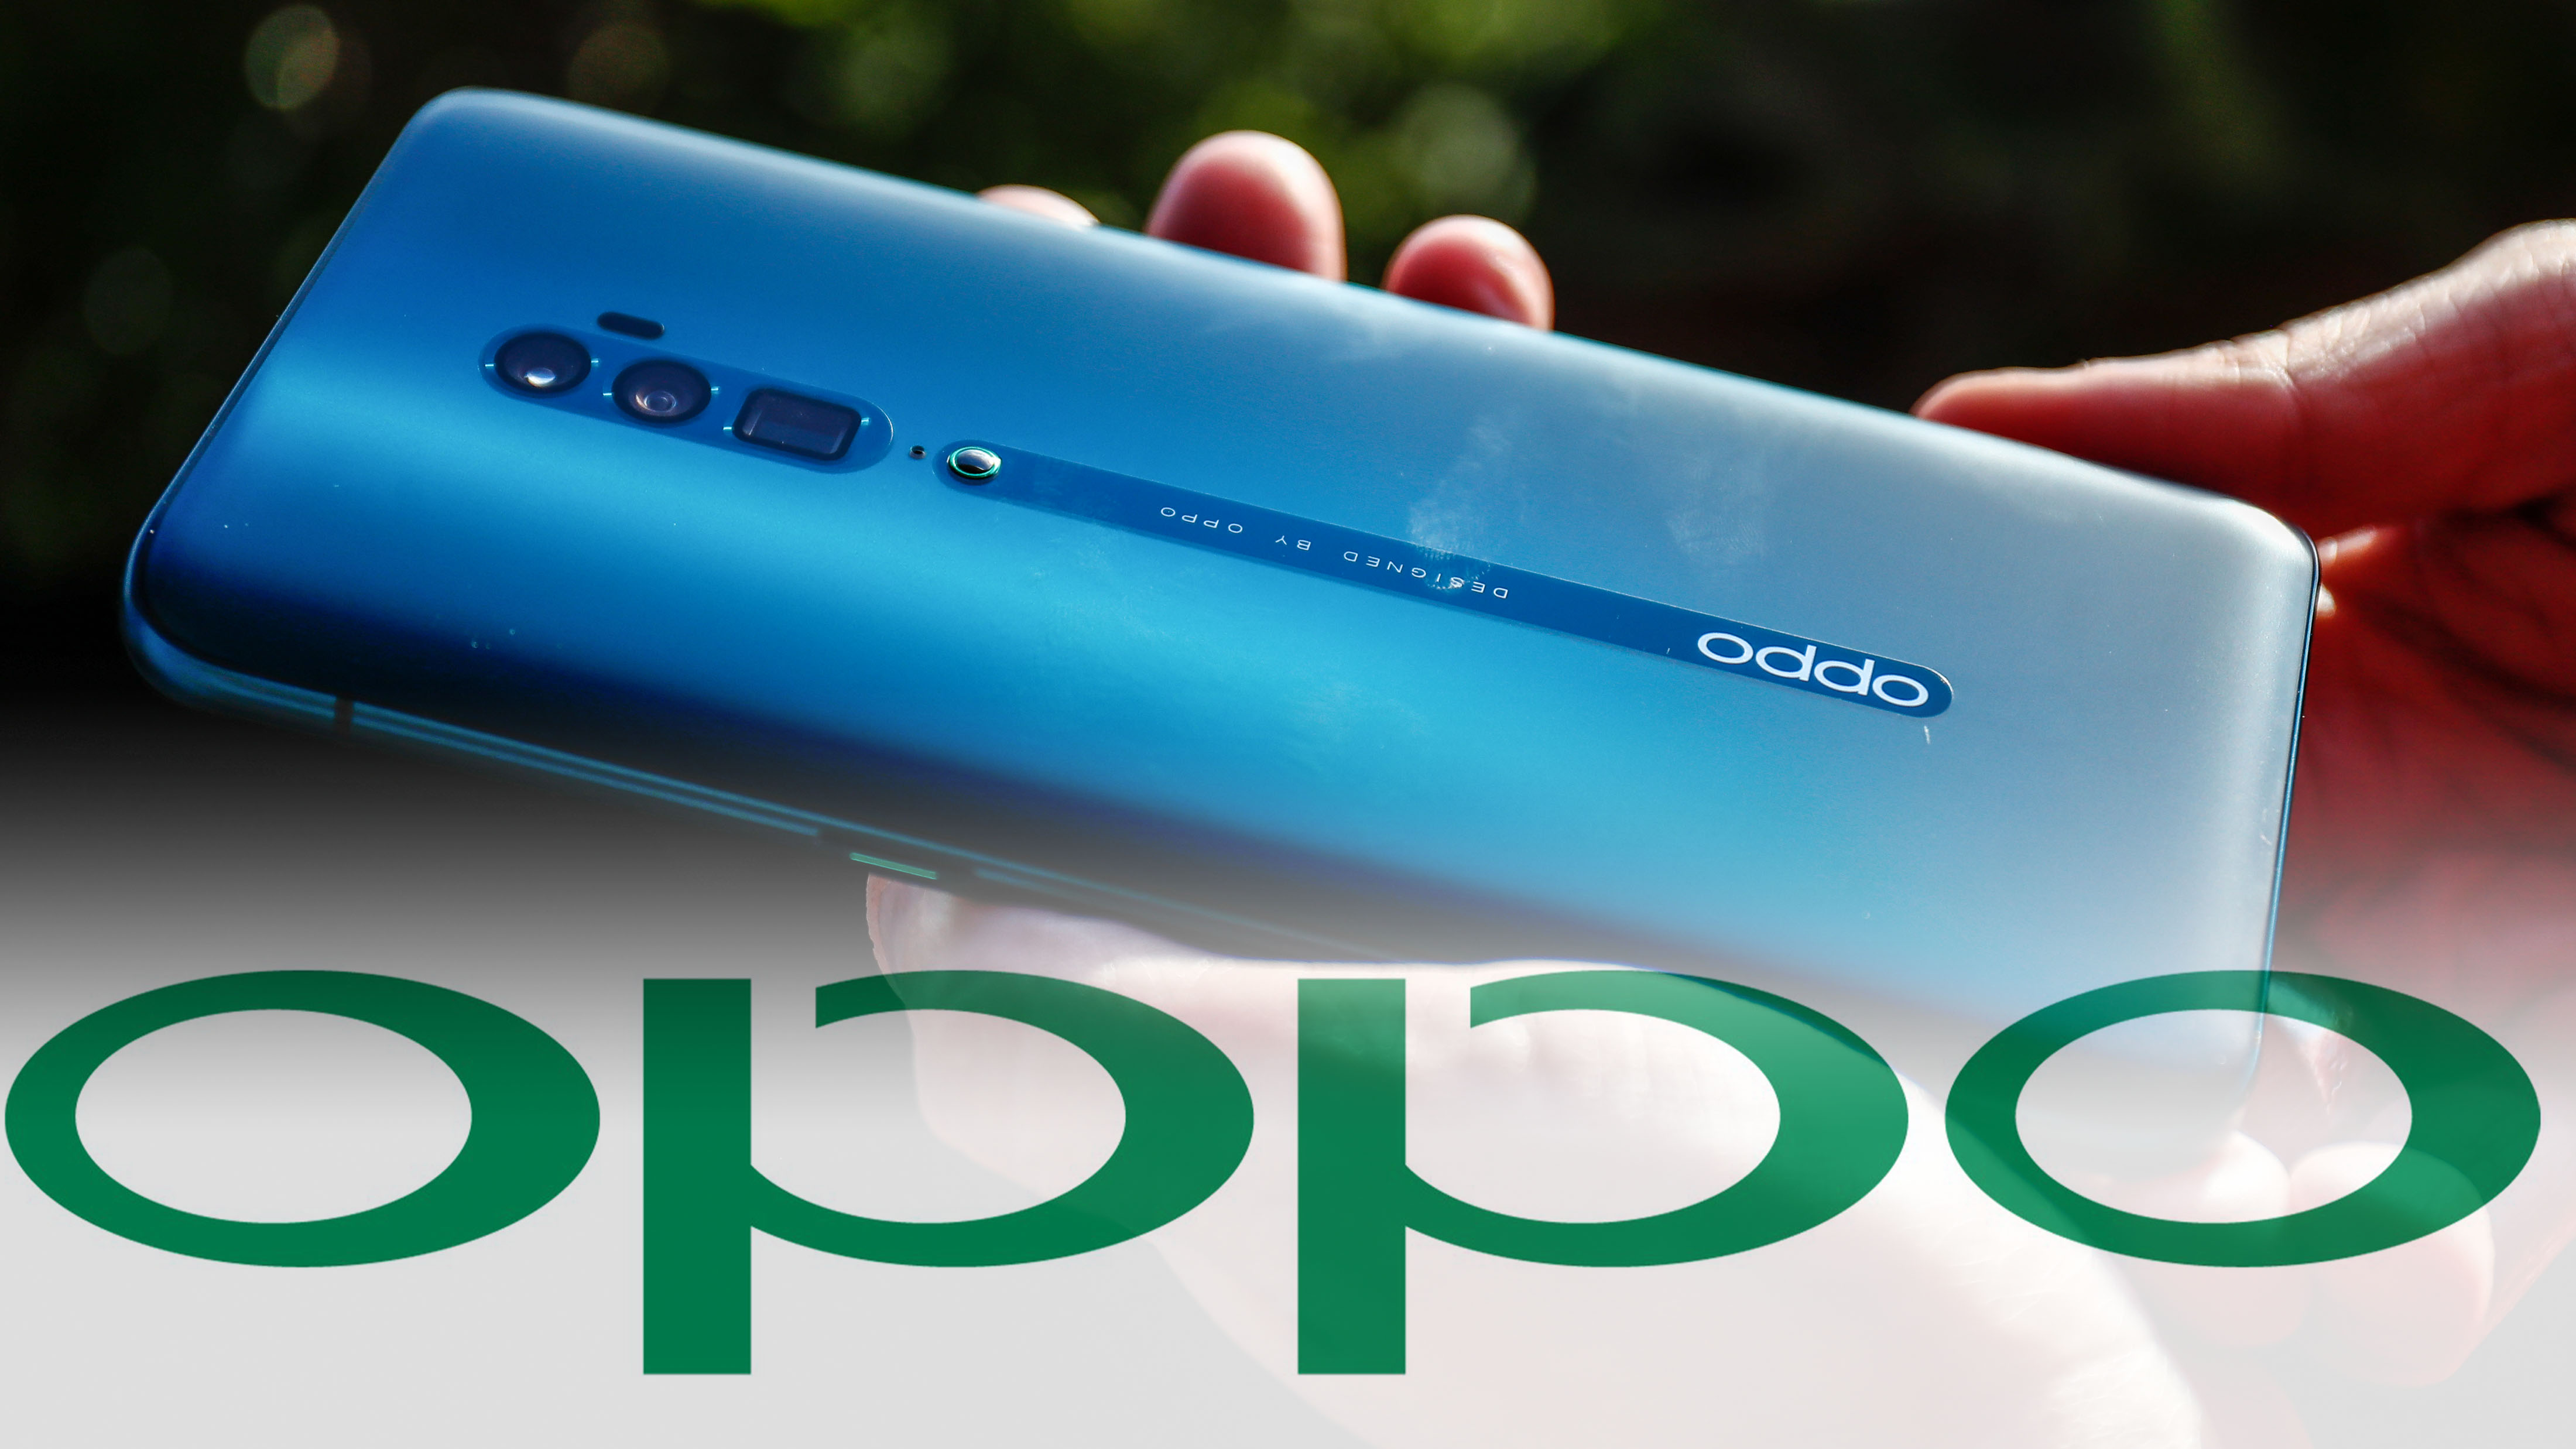 China's Oppo joins race to develop own smartphone chips - Nikkei Asia